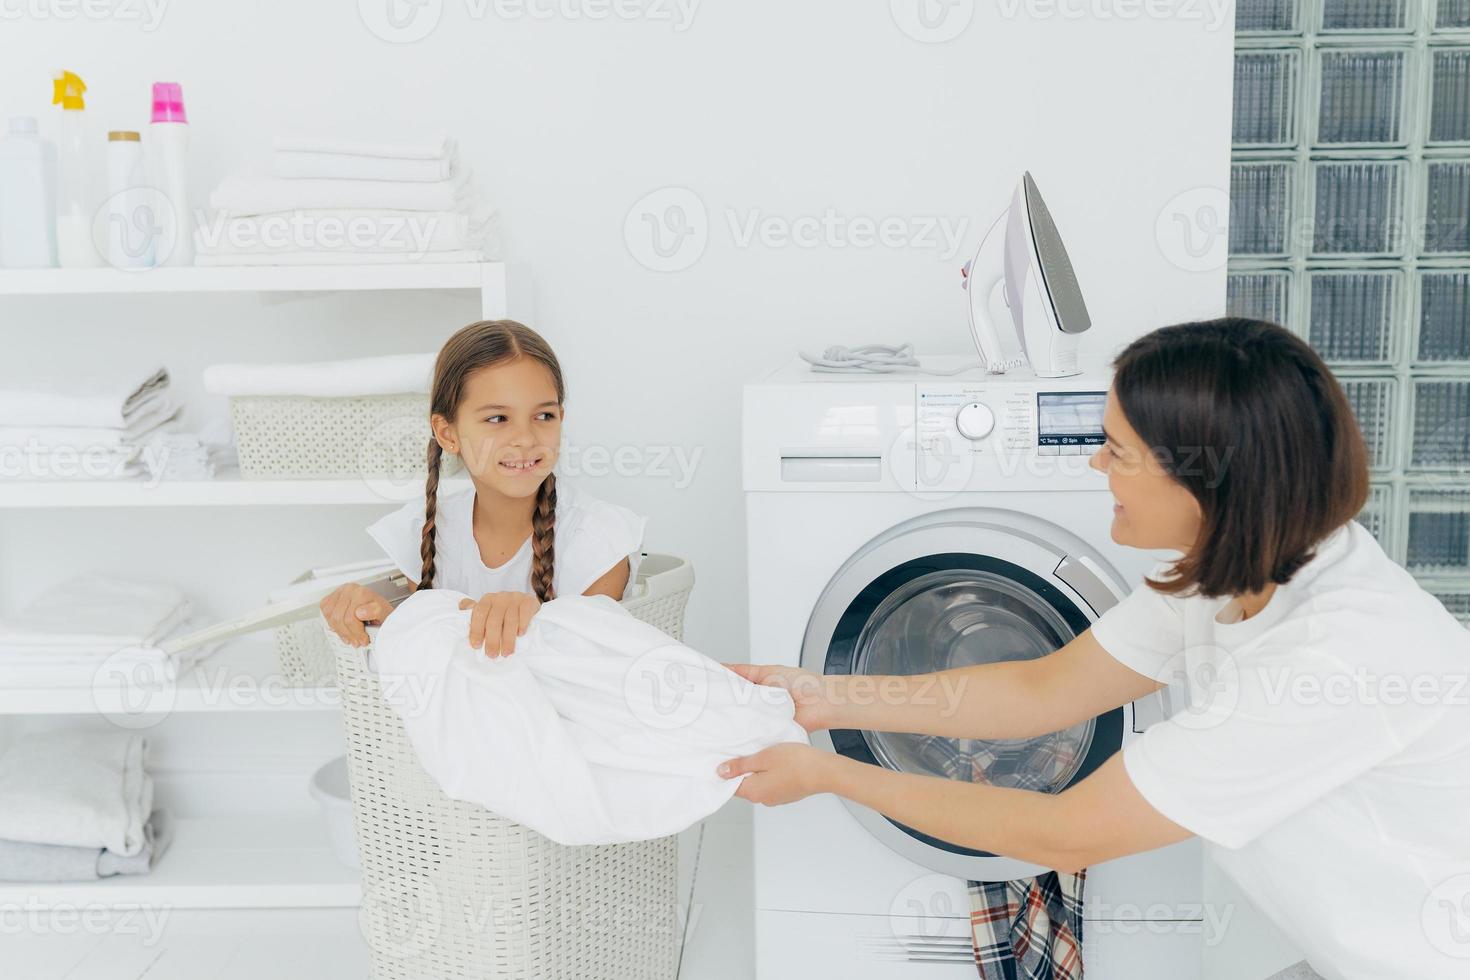 Happy woman with dark short hair pulls off laundry from basket, happy child poses in it, spend time in bathroom near washing machine and iron on top, shelf with folded white towels. Laundry time photo